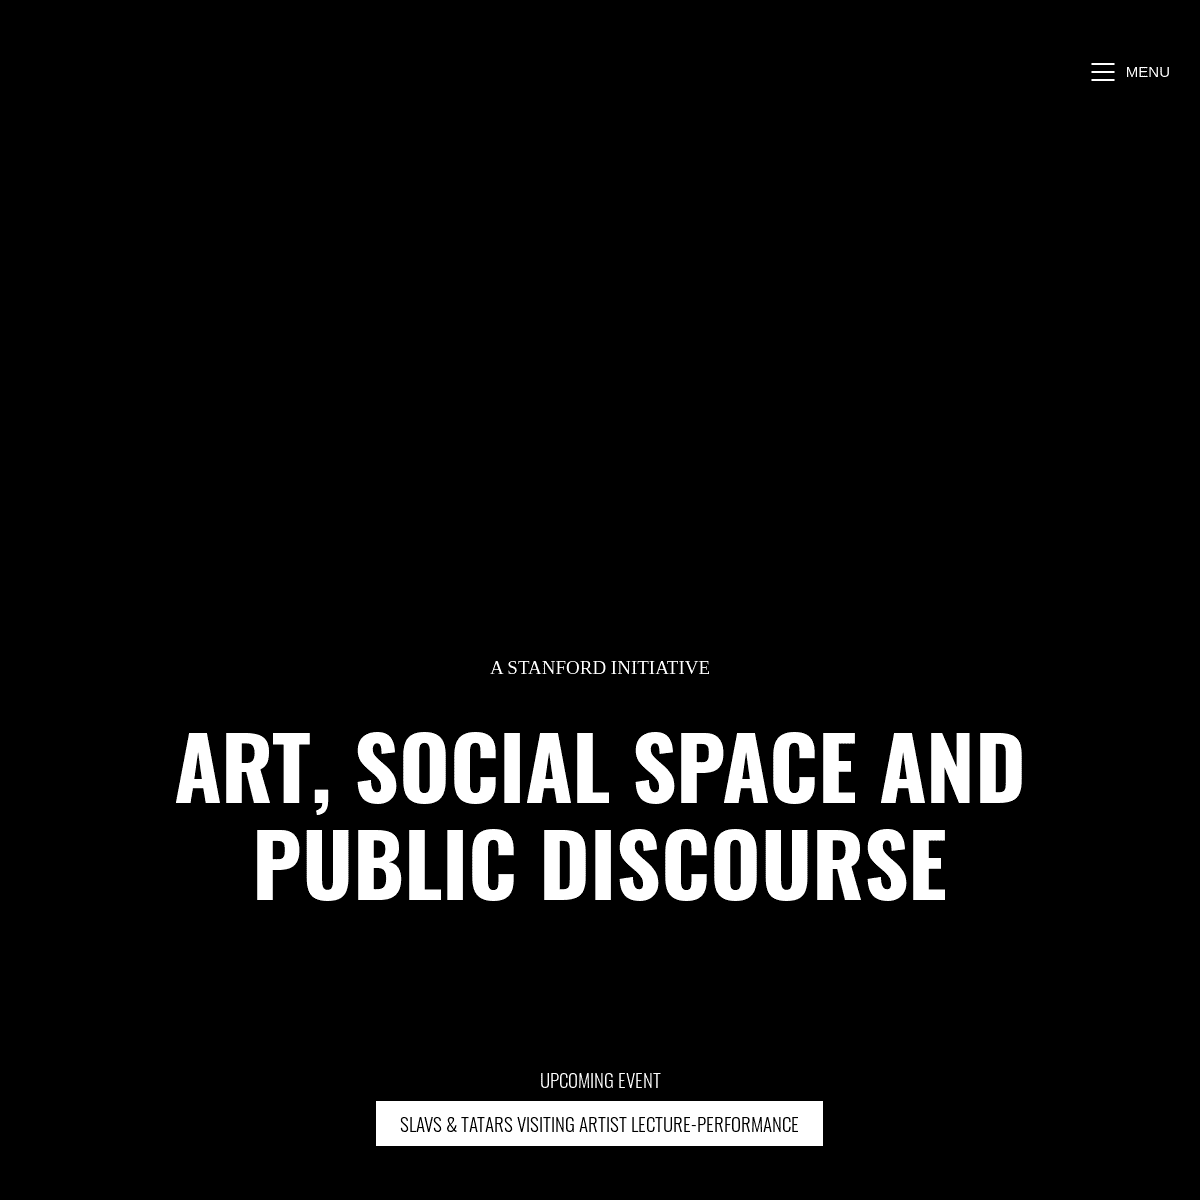 A complete backup of artandsocialspace.org